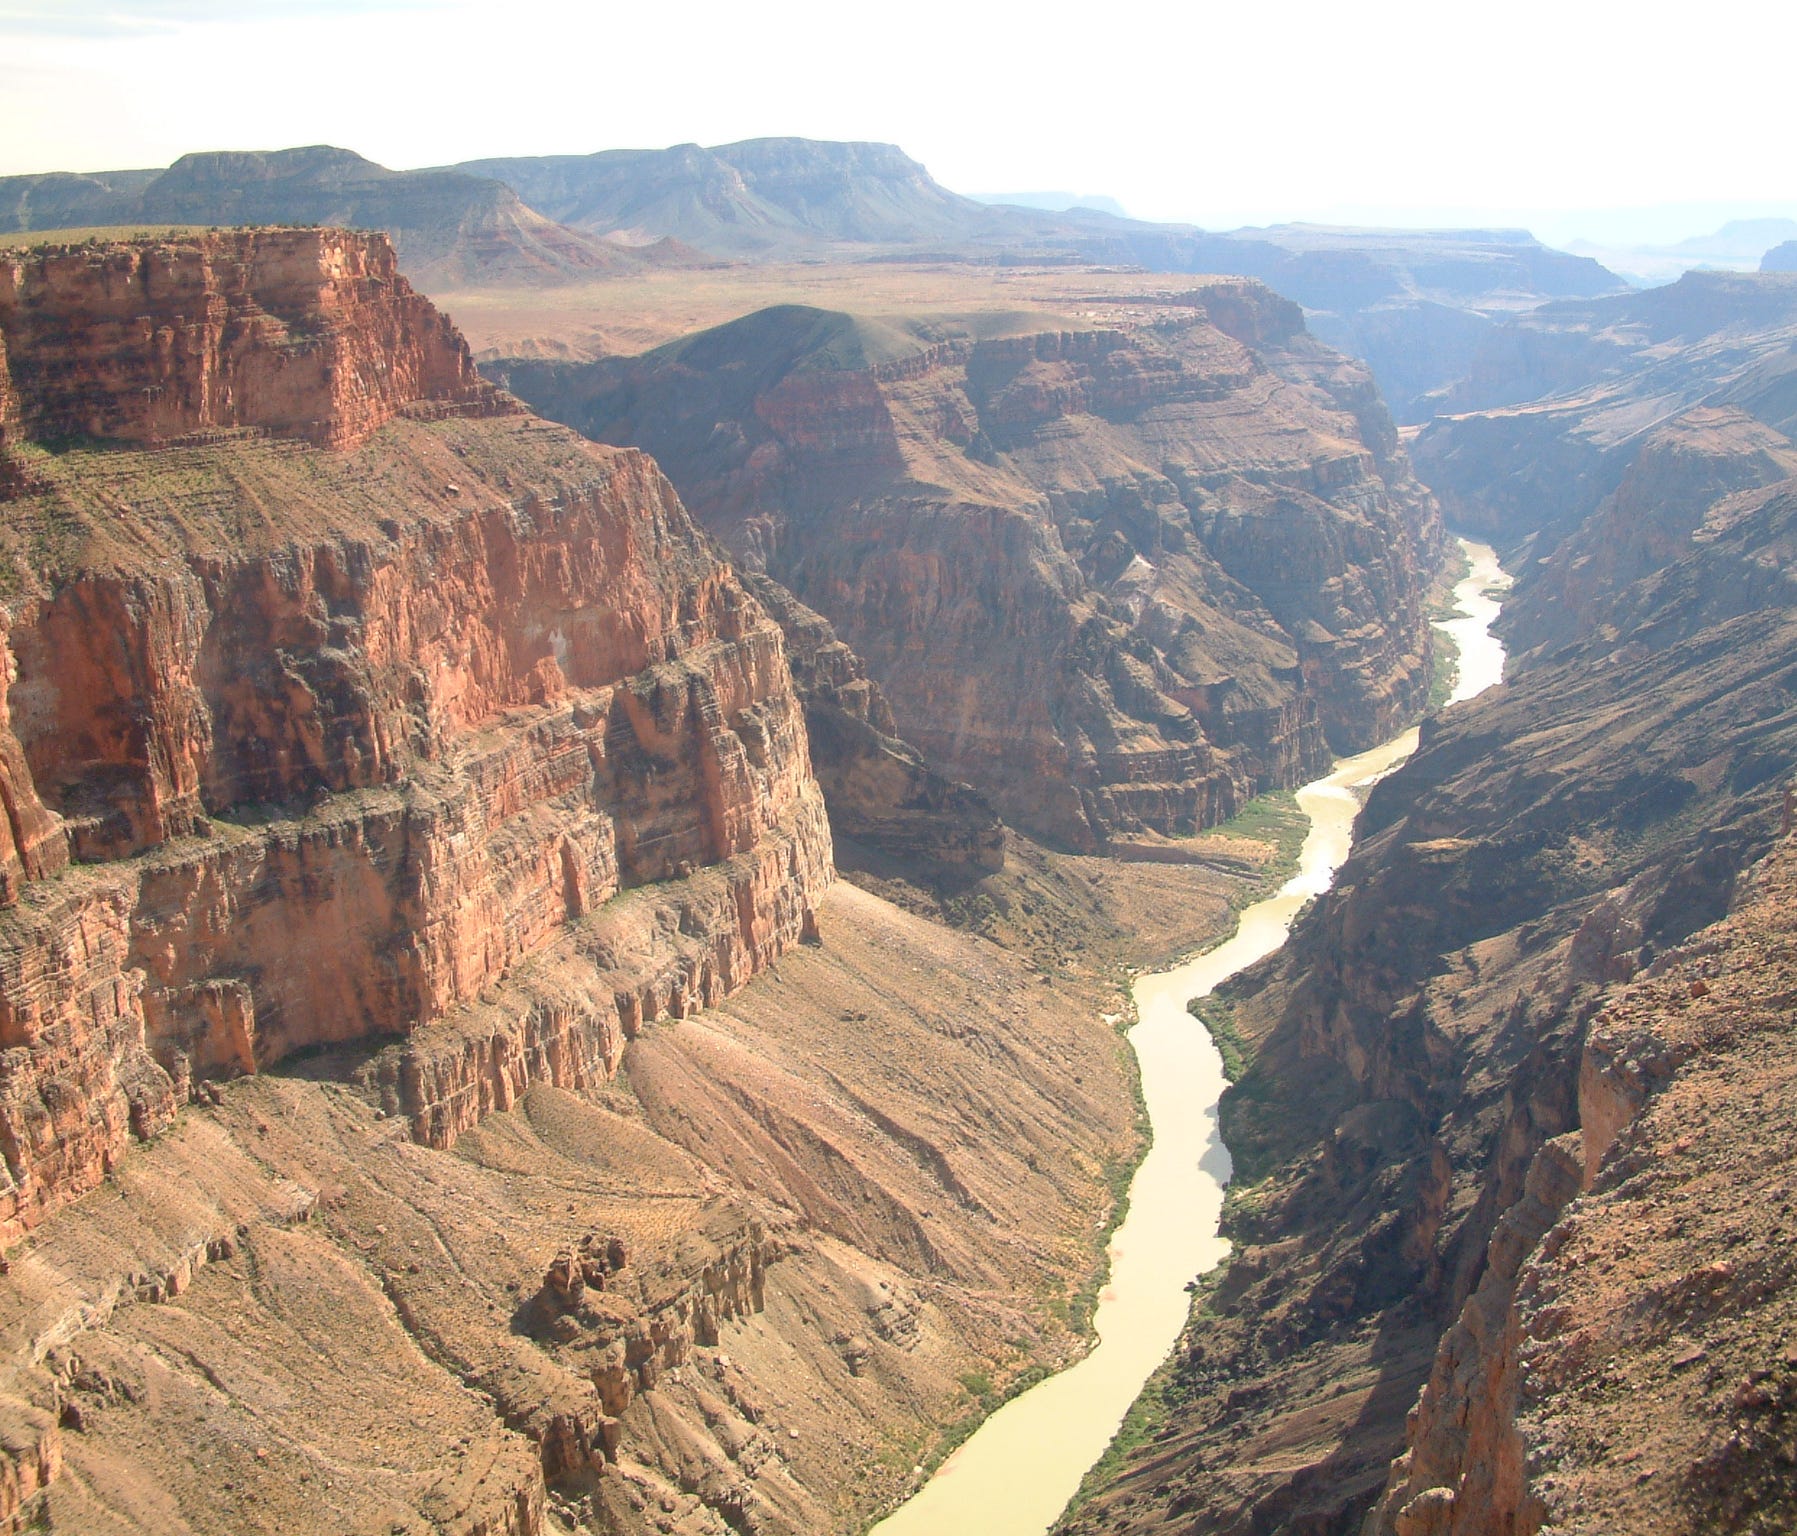 One of the most well known national parks, Grand Canyon National Park is overwhelming in its immense size and depth. Lesser known but just as grand is Arizona's Grand Canyon-Parashant National Monument, located 30 miles southwest of St. George, Utah.